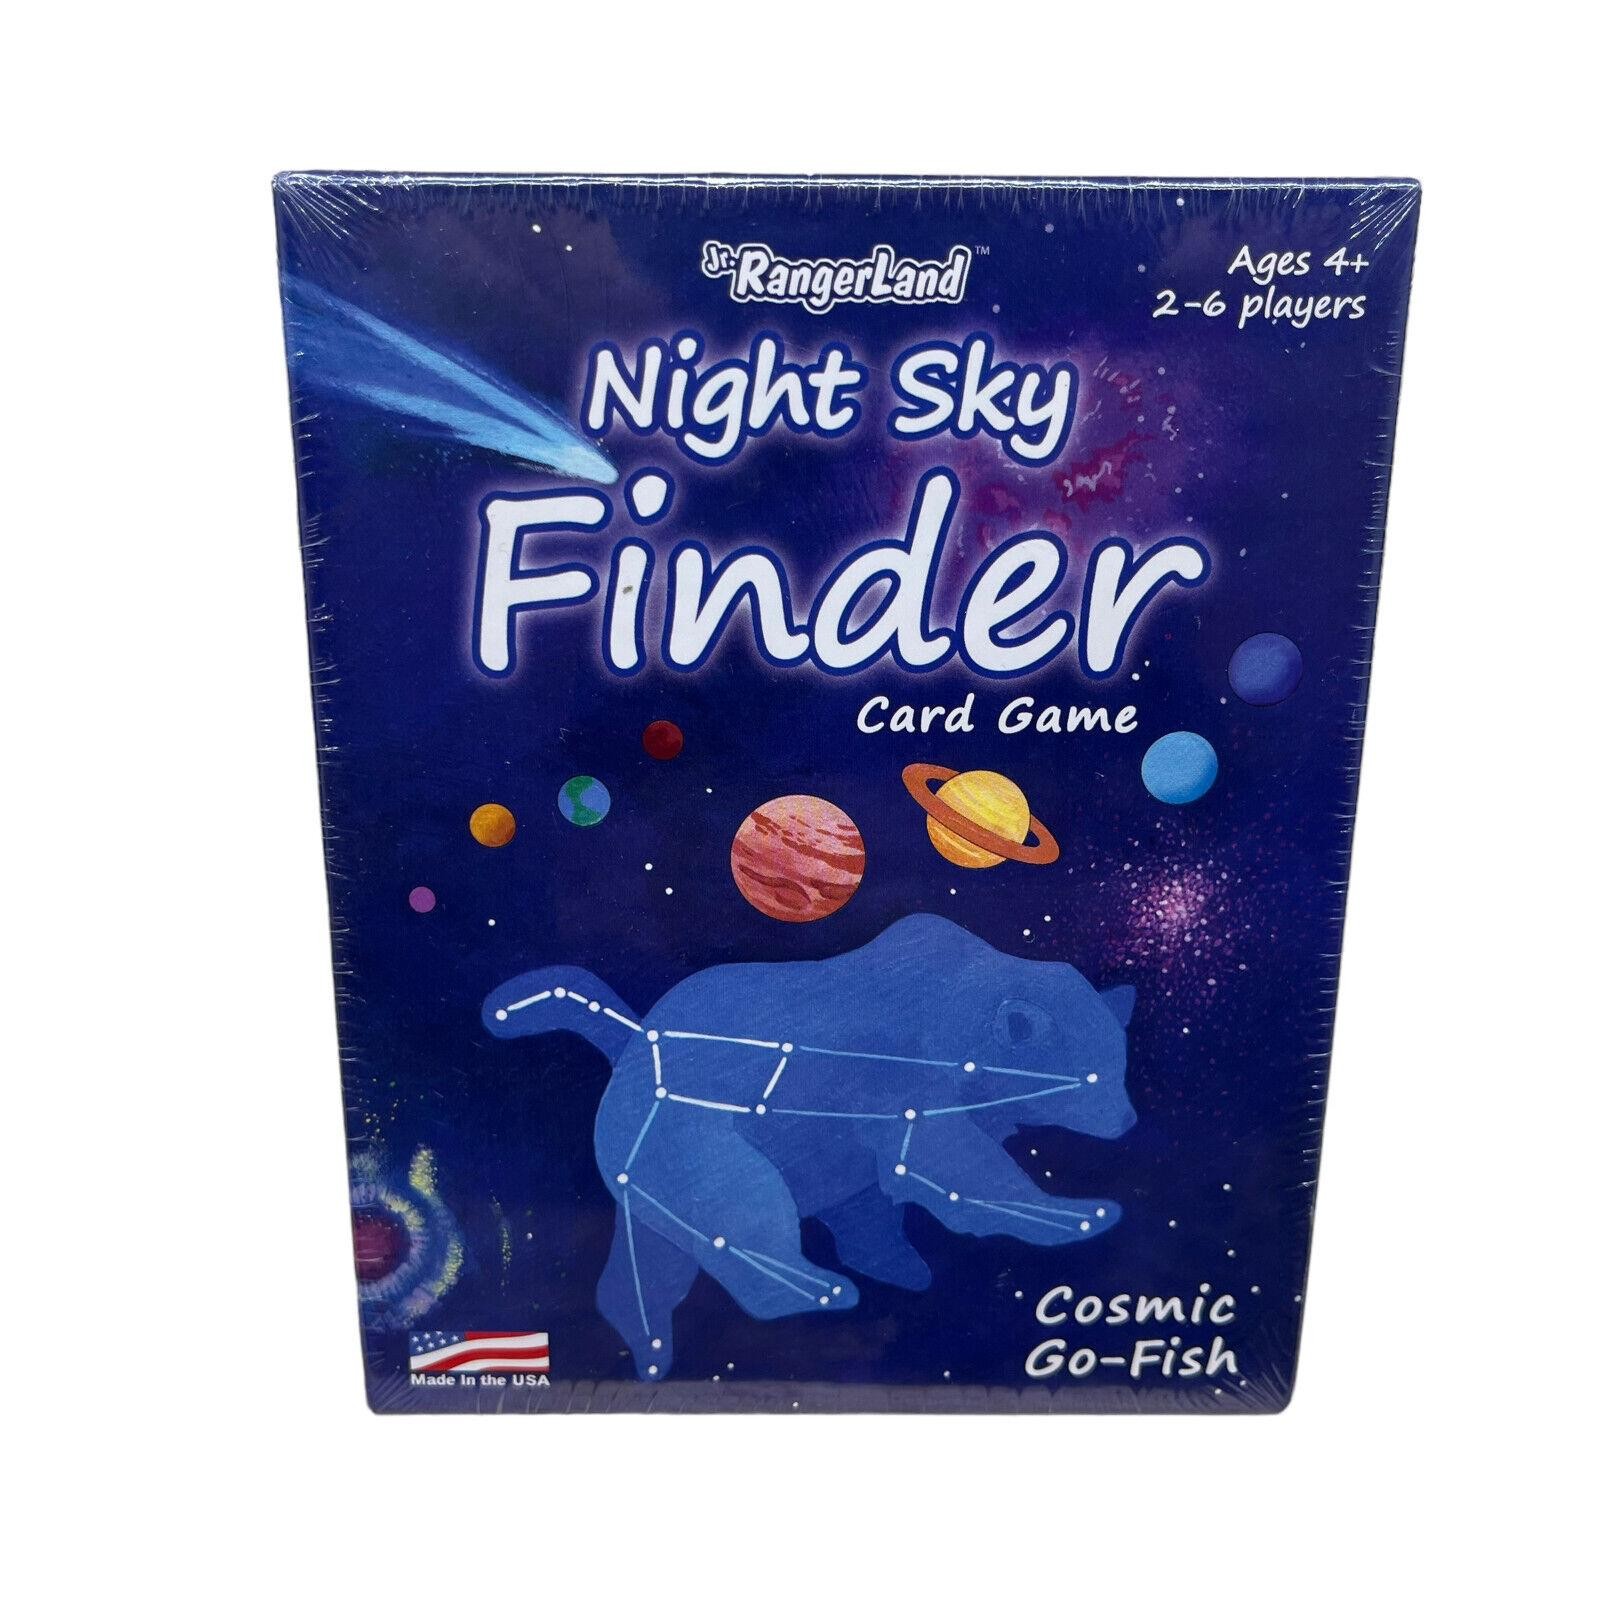 Jr. RangerLand Night Sky Finder Card Game Cosmic Go-Fish Ages 4+ Made in USA NEW